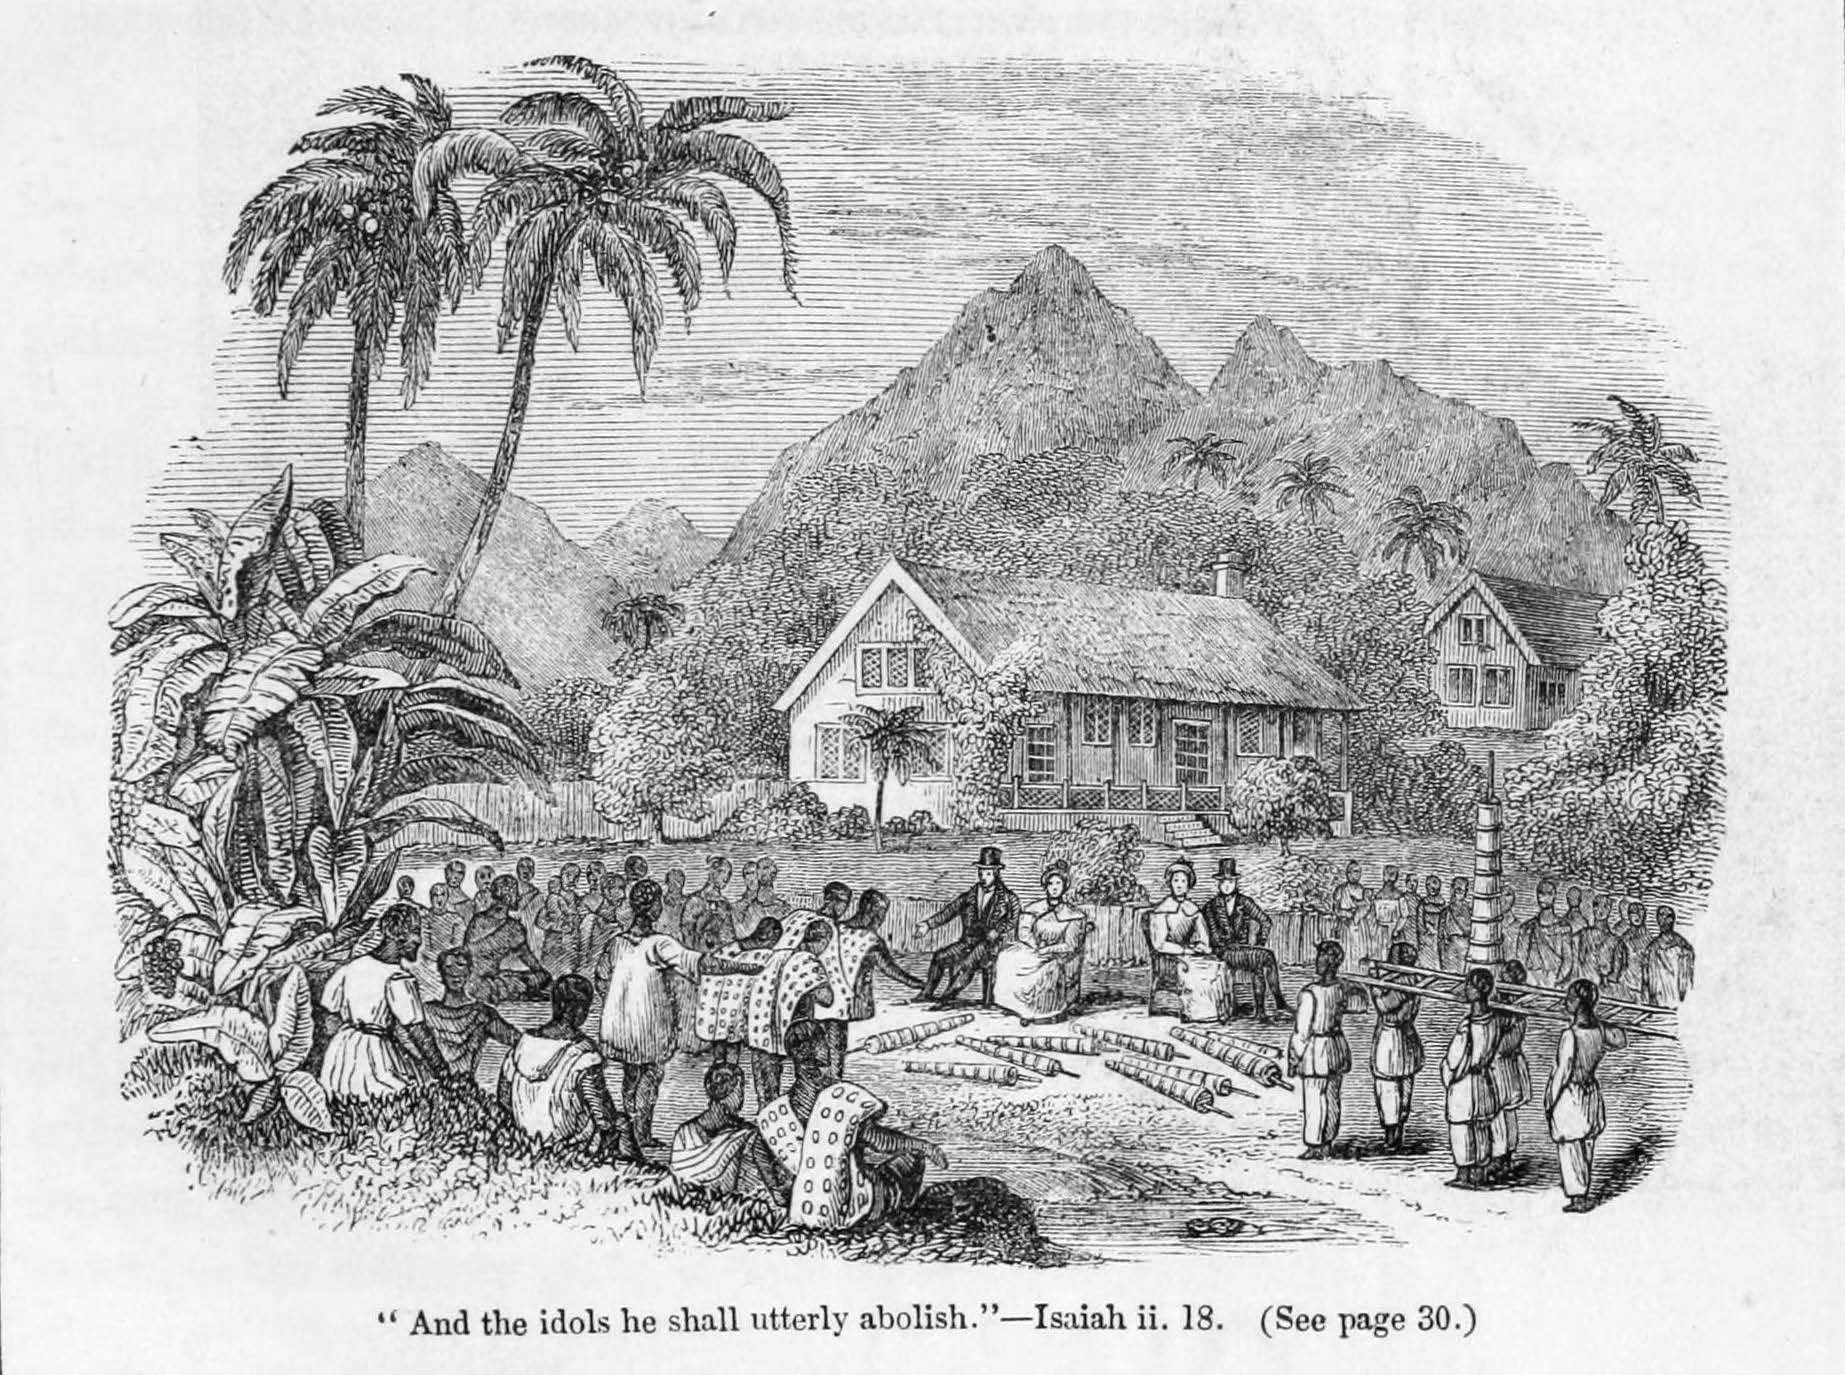 The Reverend John Williams and his wife watching as natives give up their idols. From Narrative of Missionary Enterprises, engraving by George Baxter.